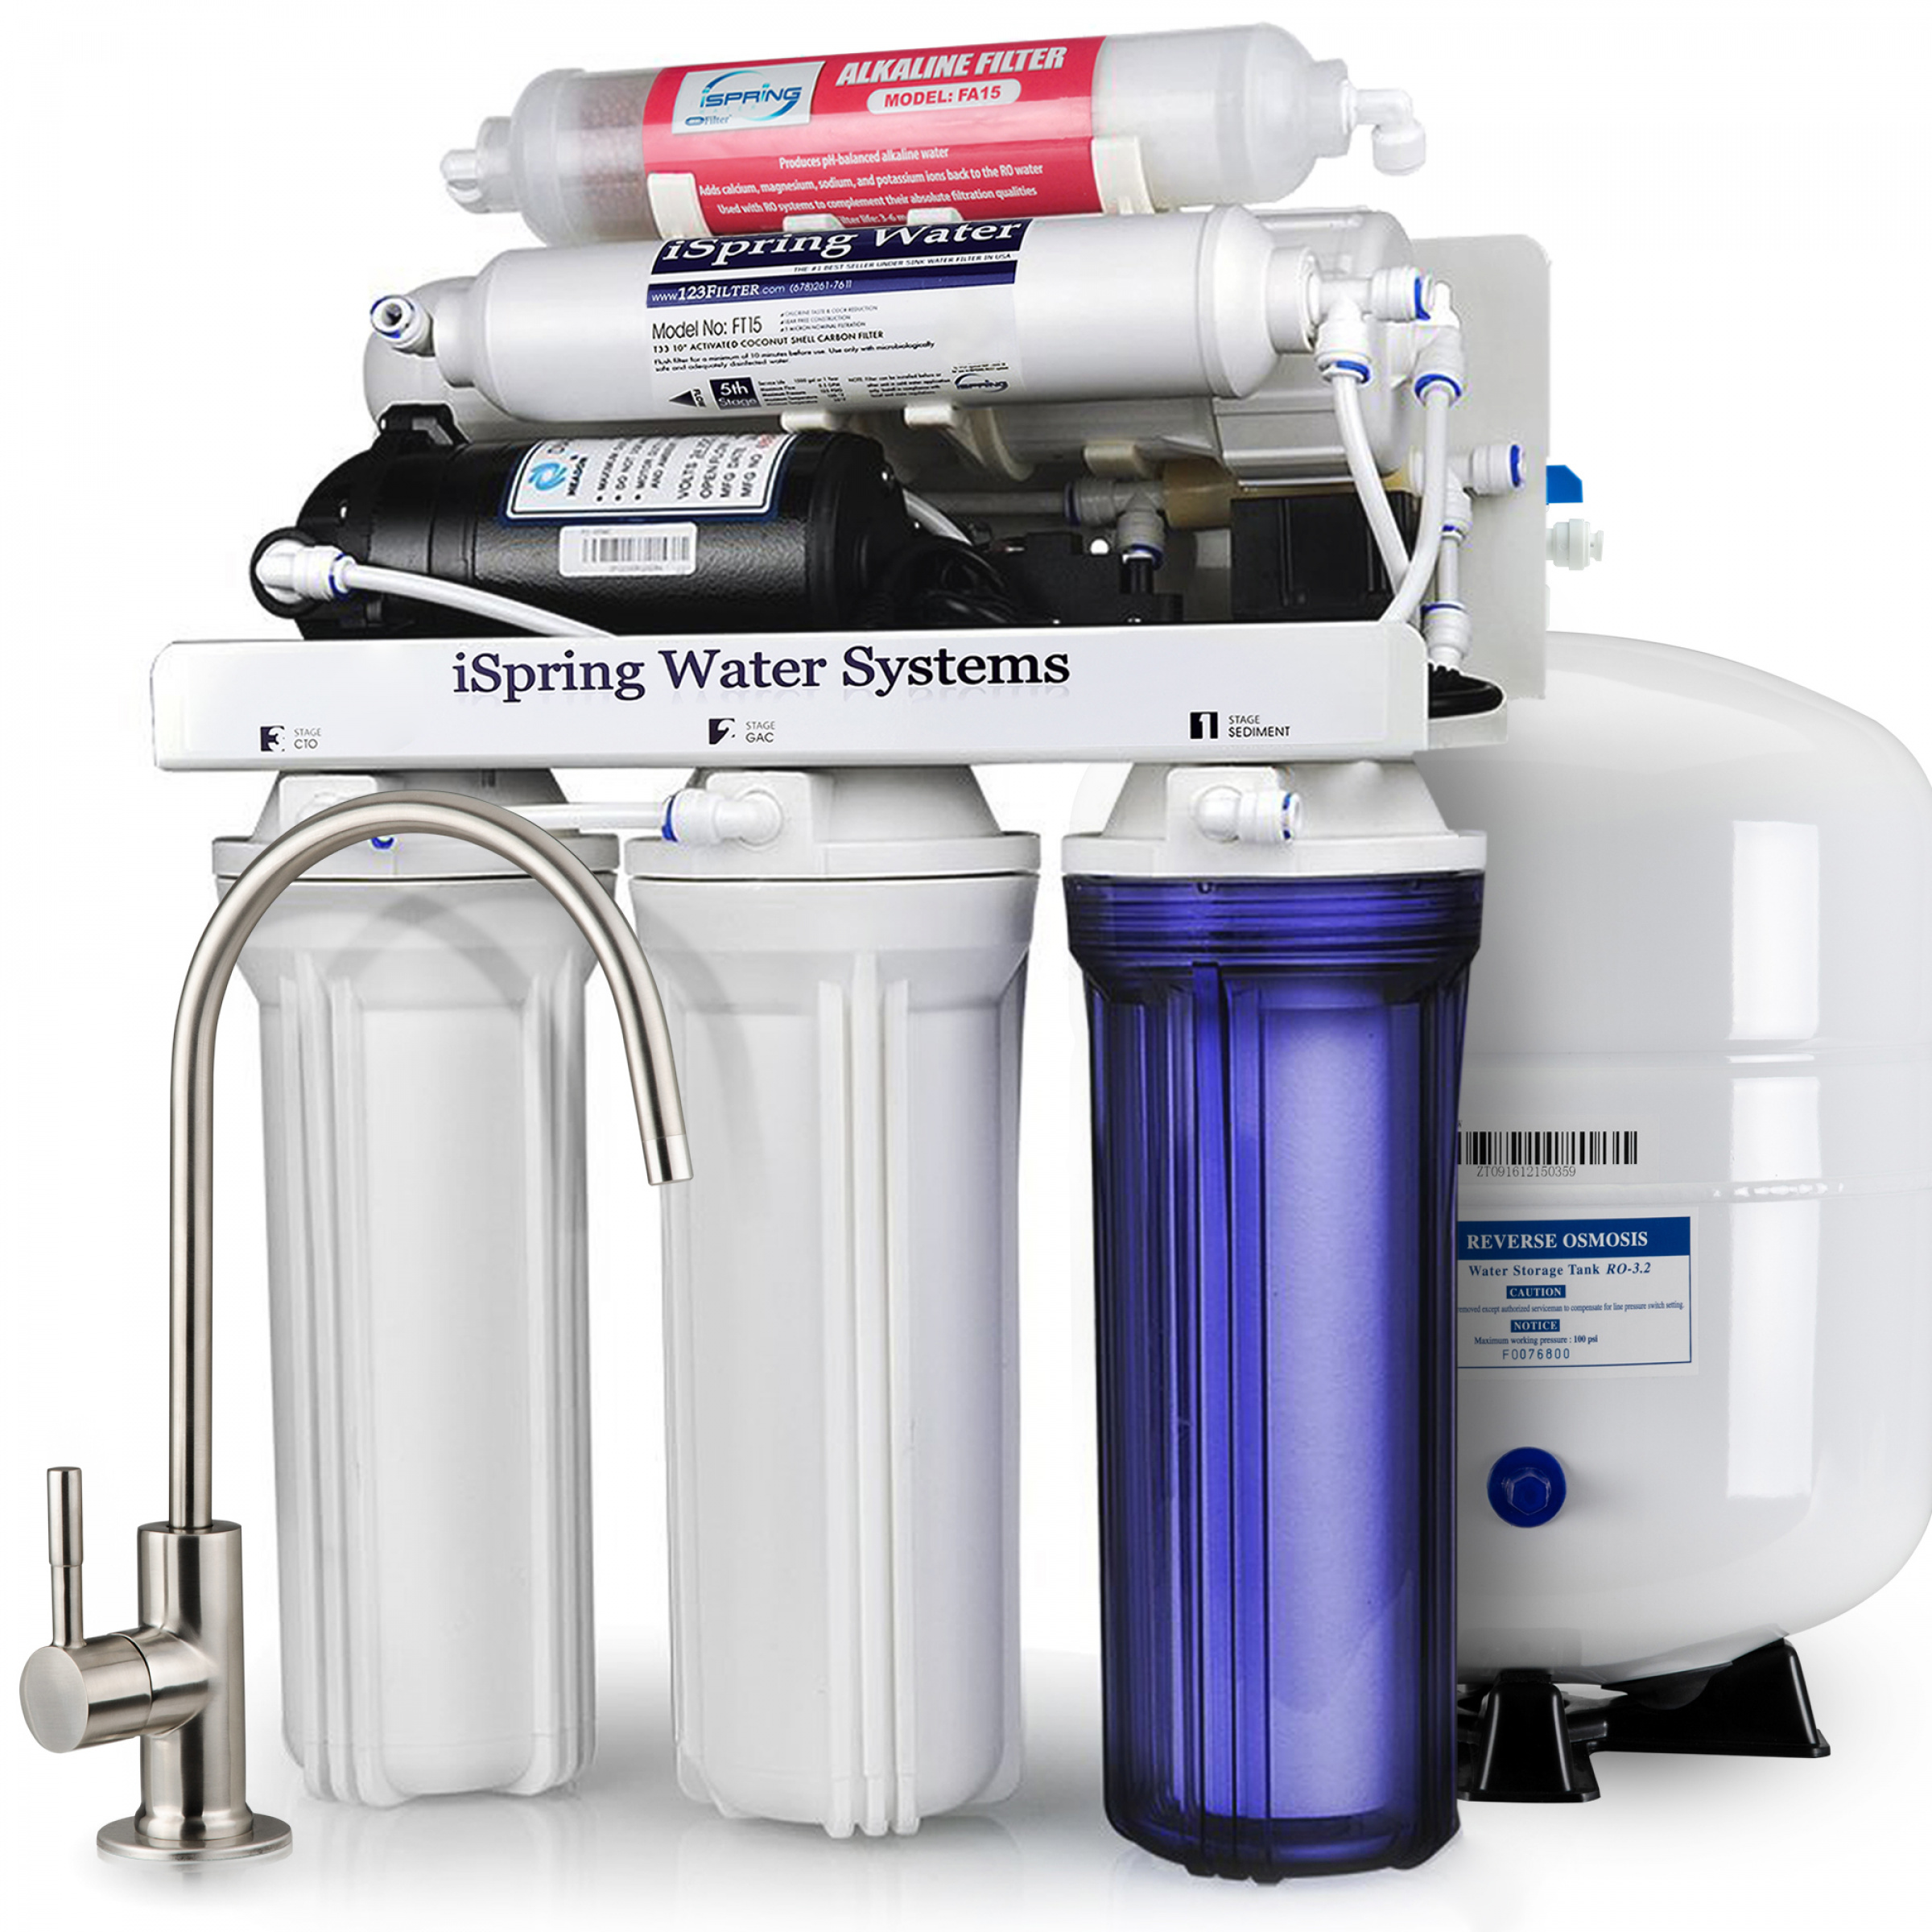 iSpring RCC7P-AK 6-Stage Reverse Osmosis System Under Sink with Alkaline Water Filter and Pump, pH+, 75 GPD, TDS Reduction, RO Drinking Water Filtration System - image 1 of 8